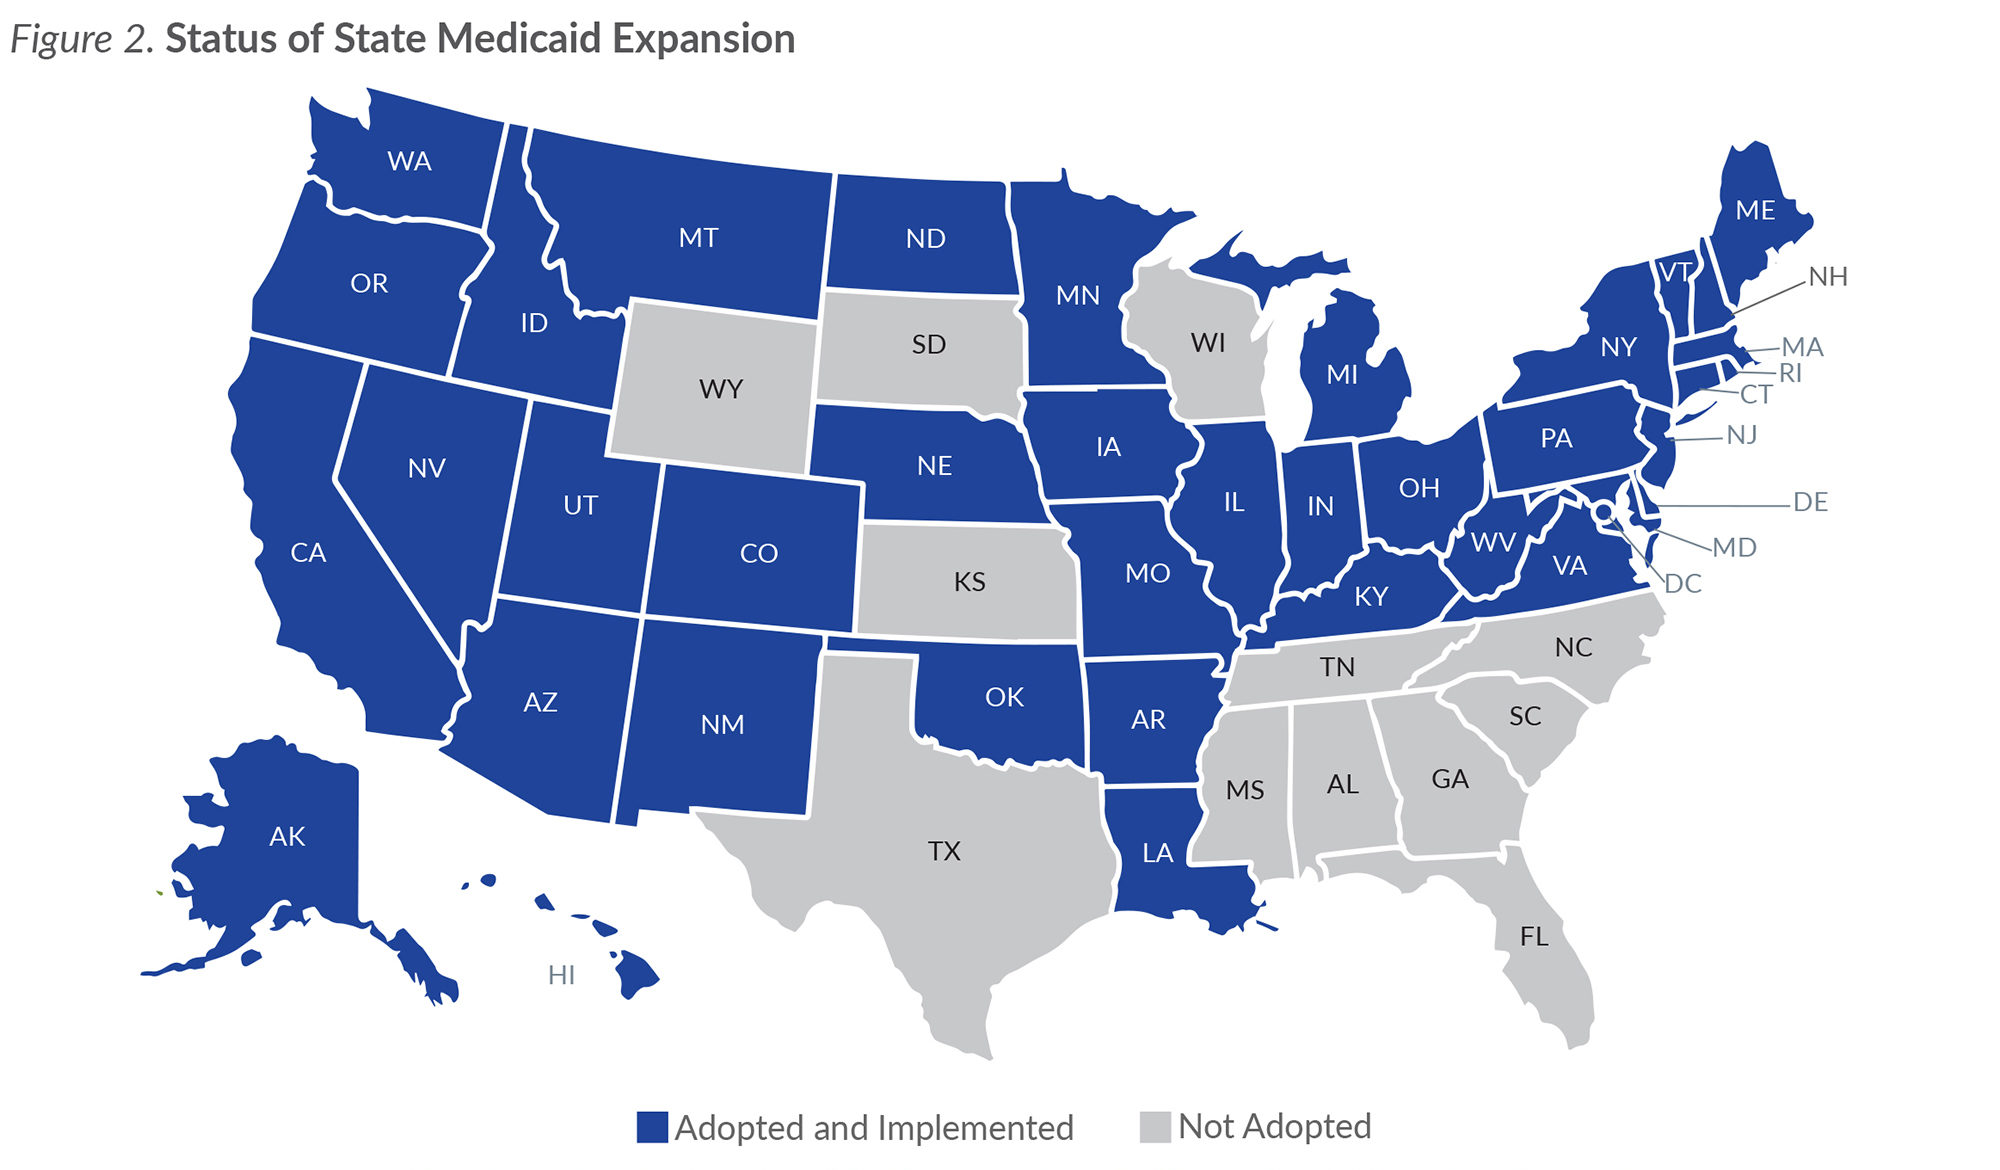 Figure 2: Map of US showing status of state Medicaid expansion